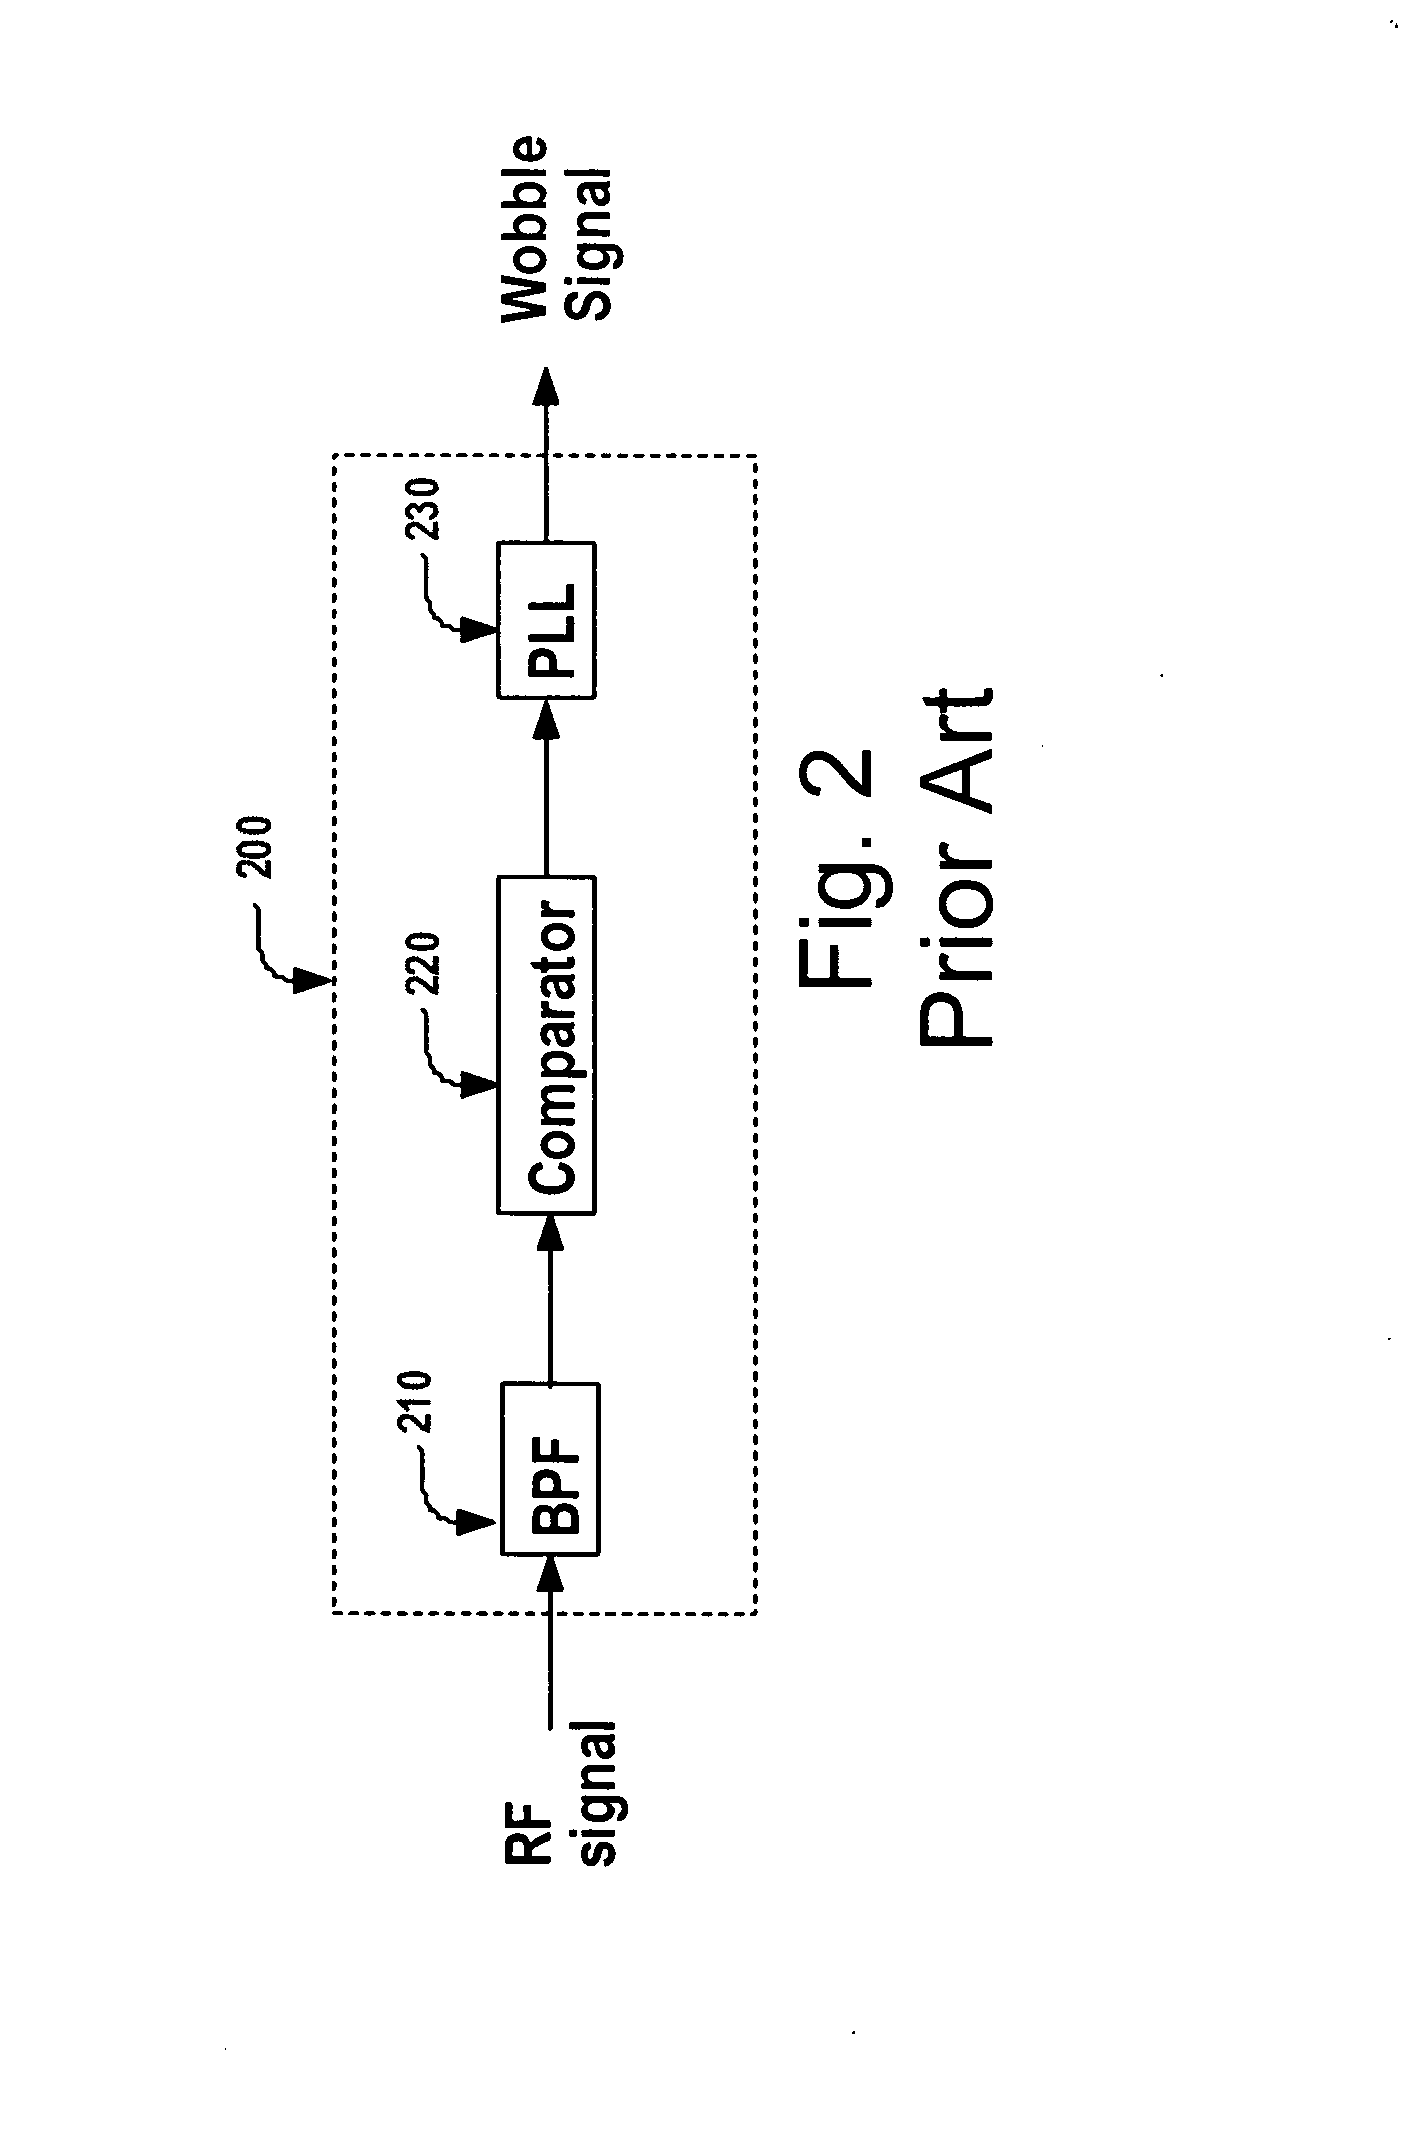 Optical disc storage systems and methods utilizing frequency predictive wobble signal detection